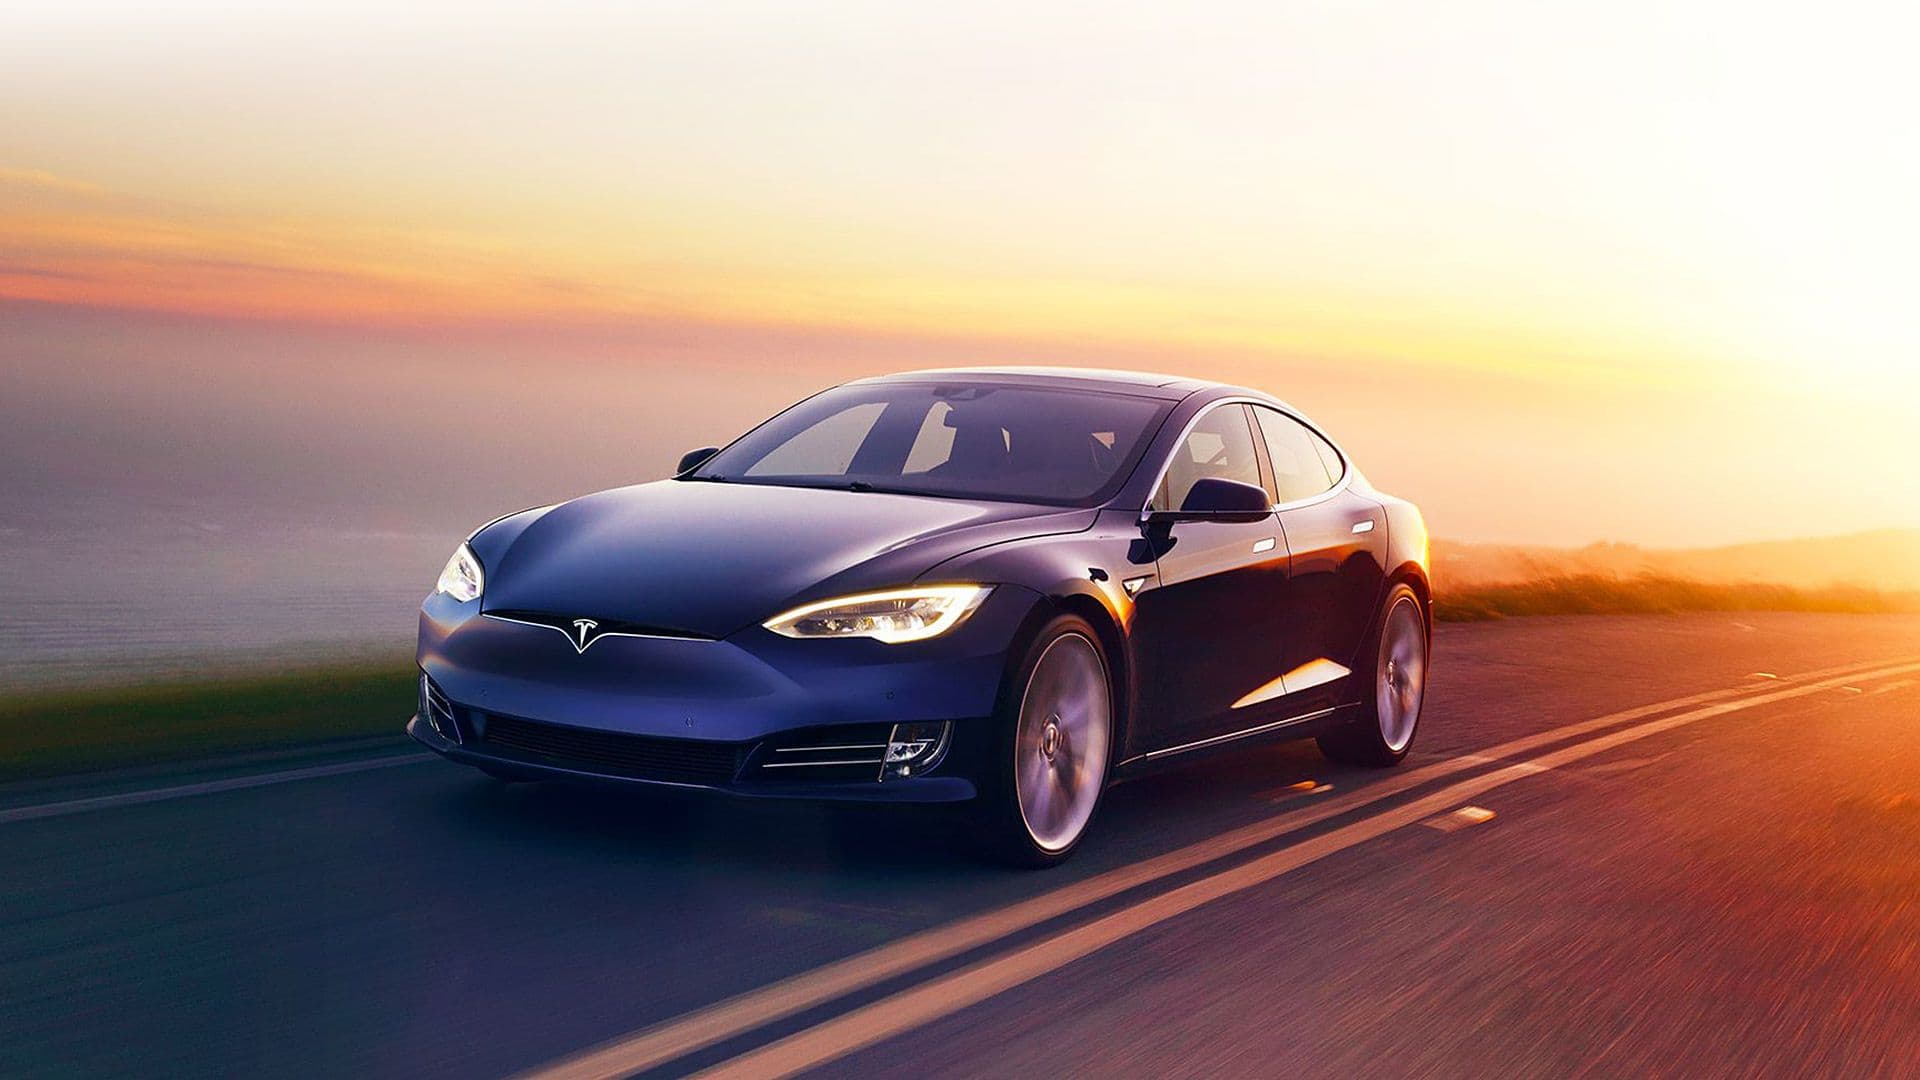 Tesla Model S Is the First Electric Car With 400 Miles of Range, Says EPA